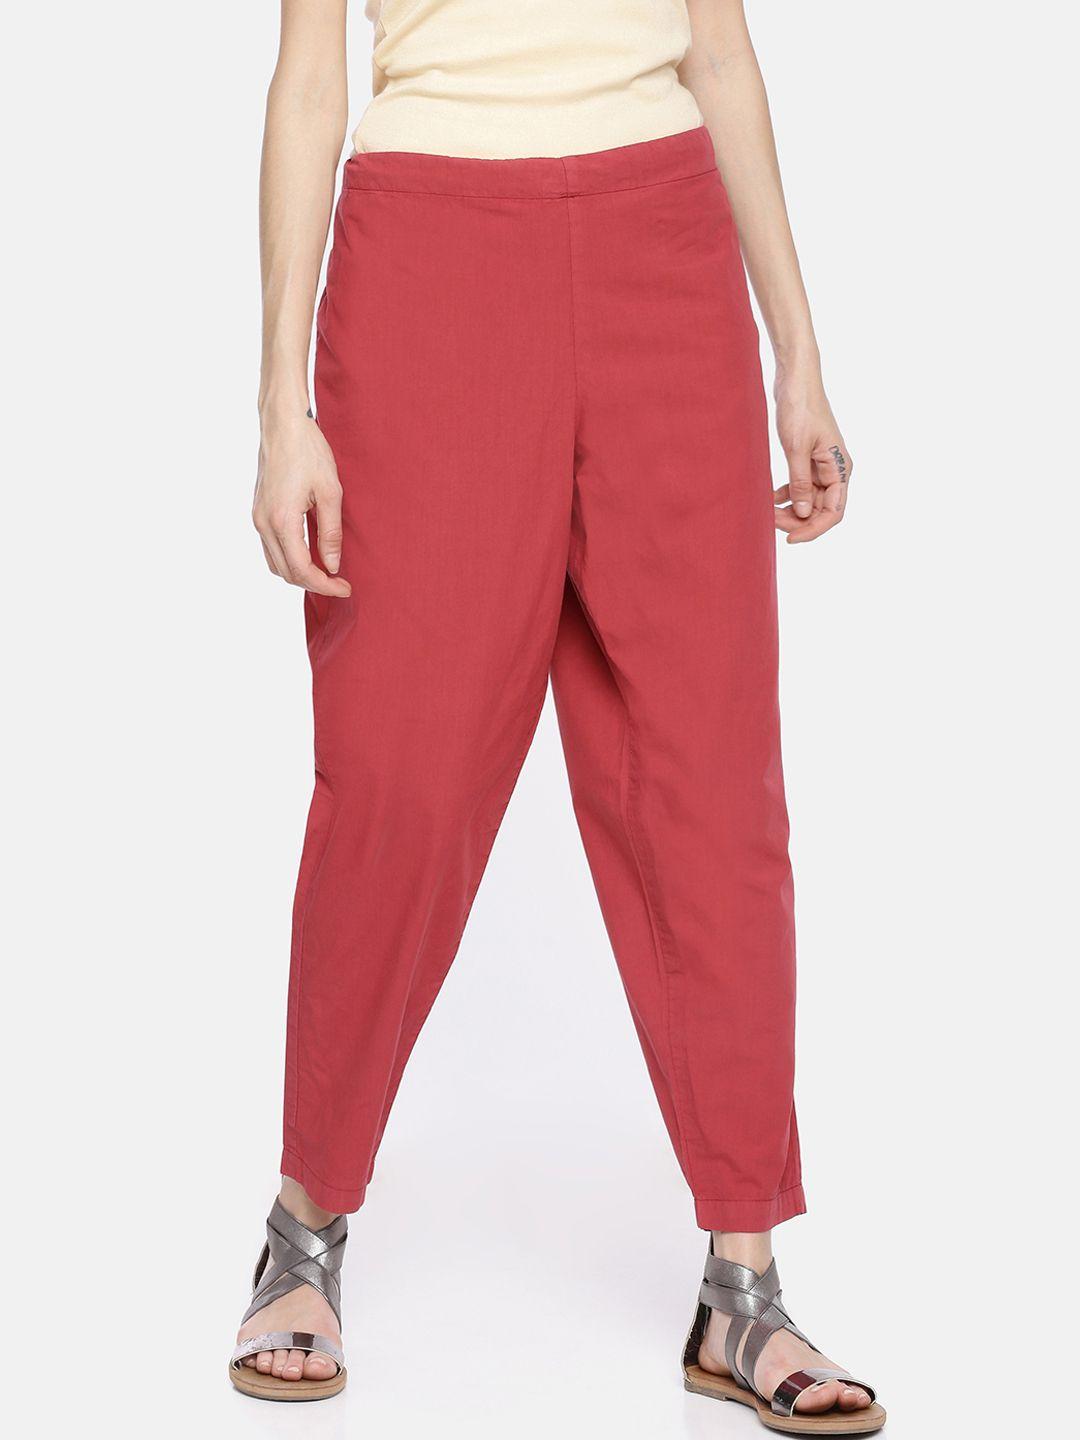 grass by gitika goyal women maroon tapered fit solid drop crotch trousers